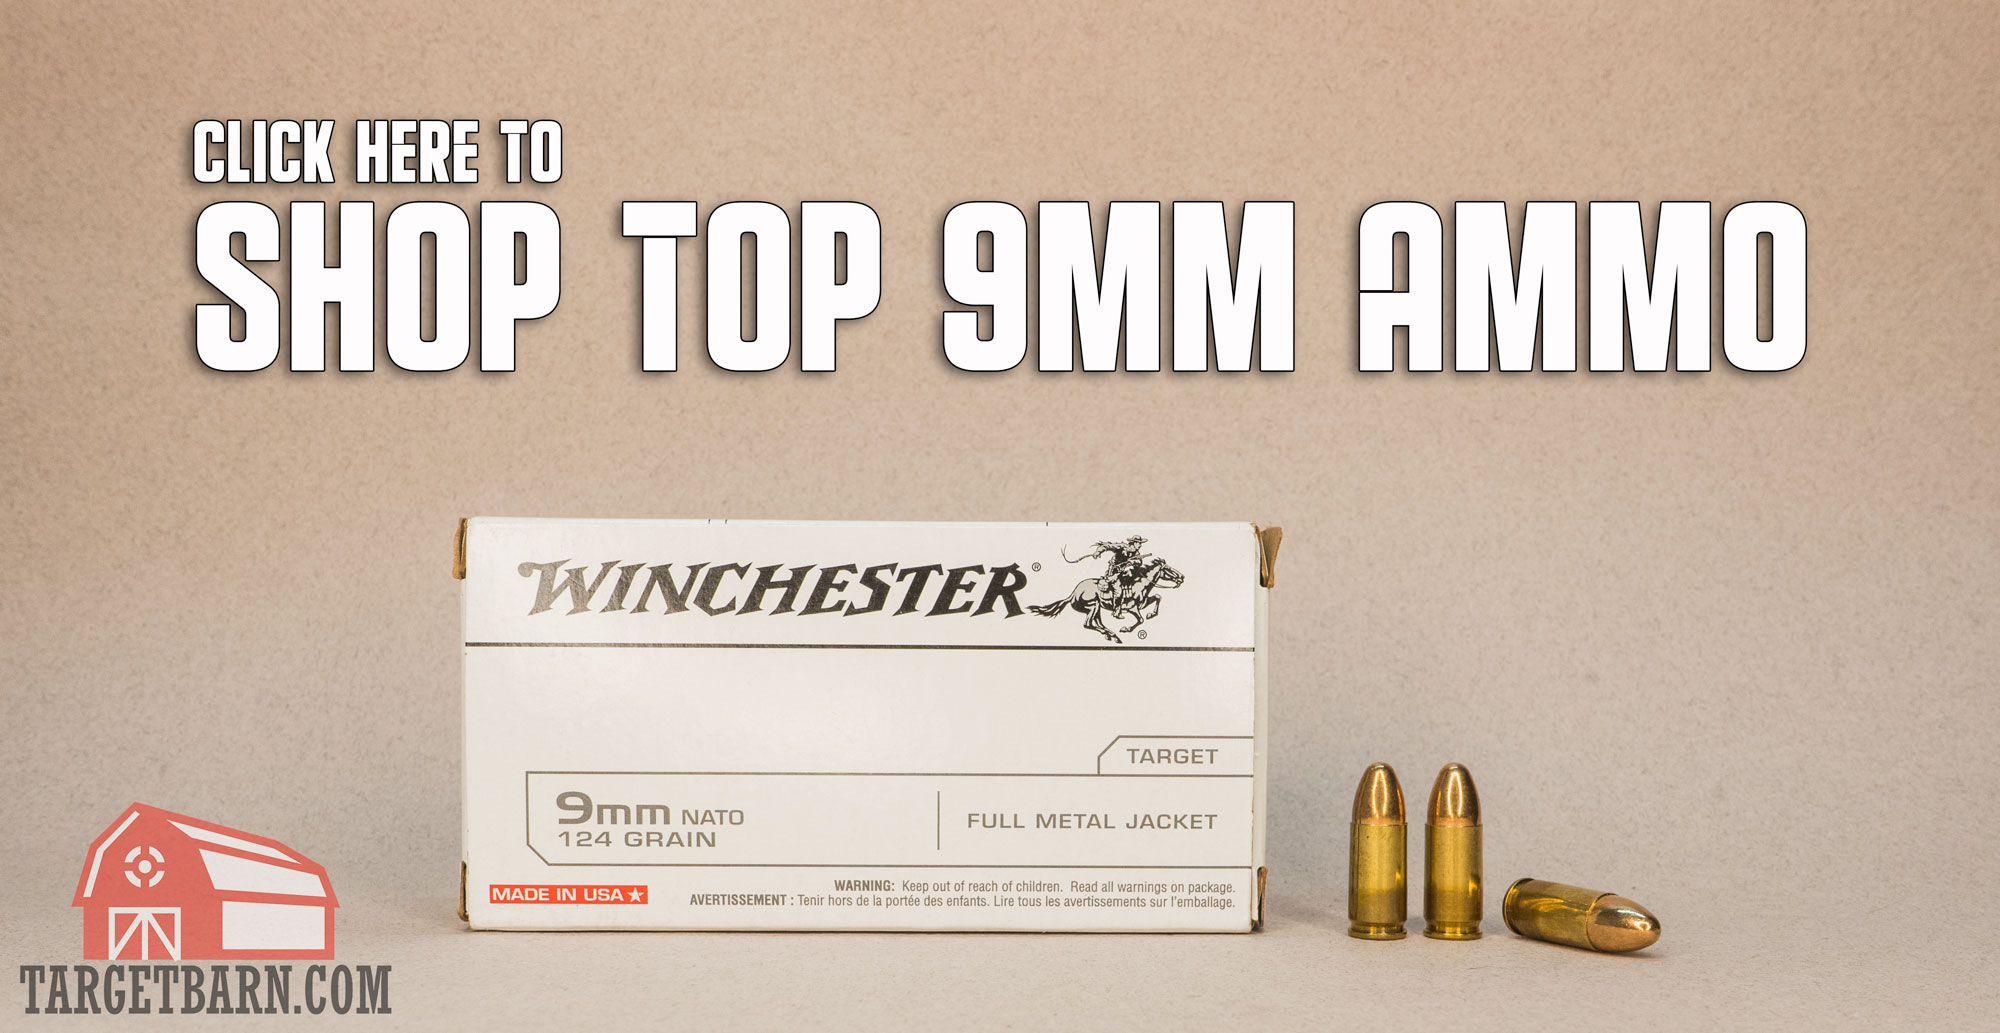 a box of winchester 9mm ammo and three rounds with text that says click here to shop top 9mm ammo